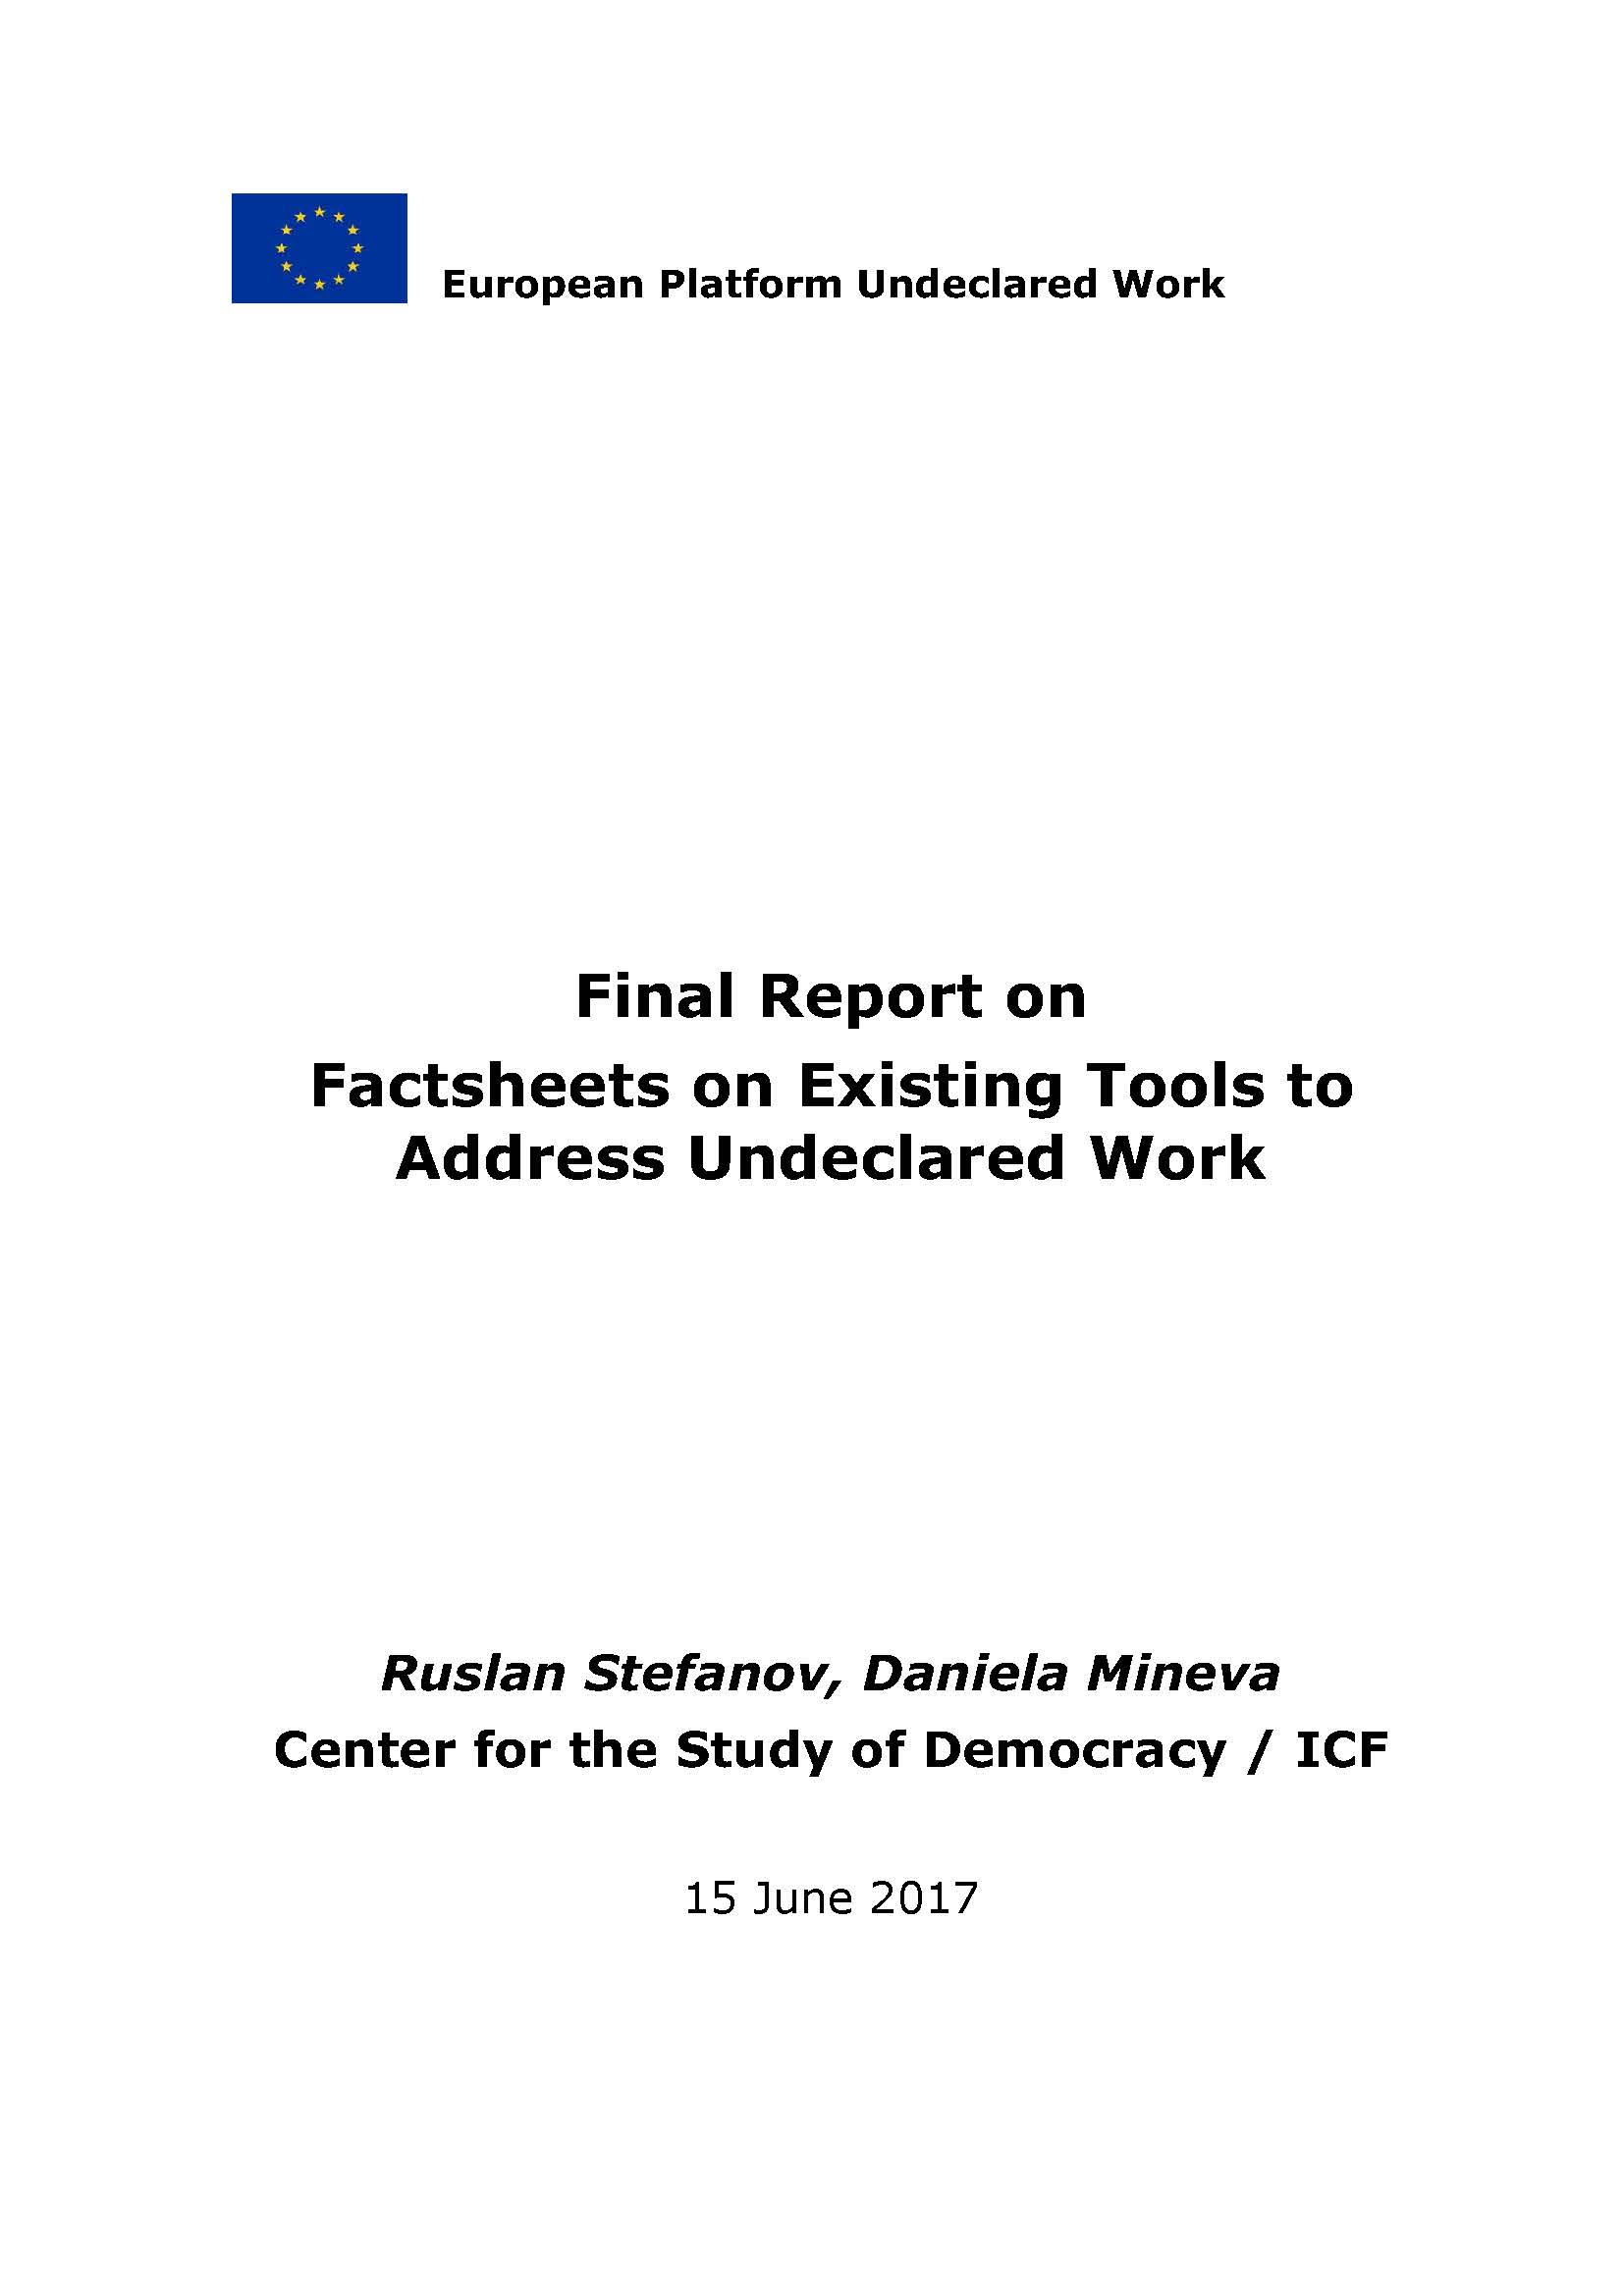 Final Report on Factsheets on Existing Tools to Address Undeclared Work